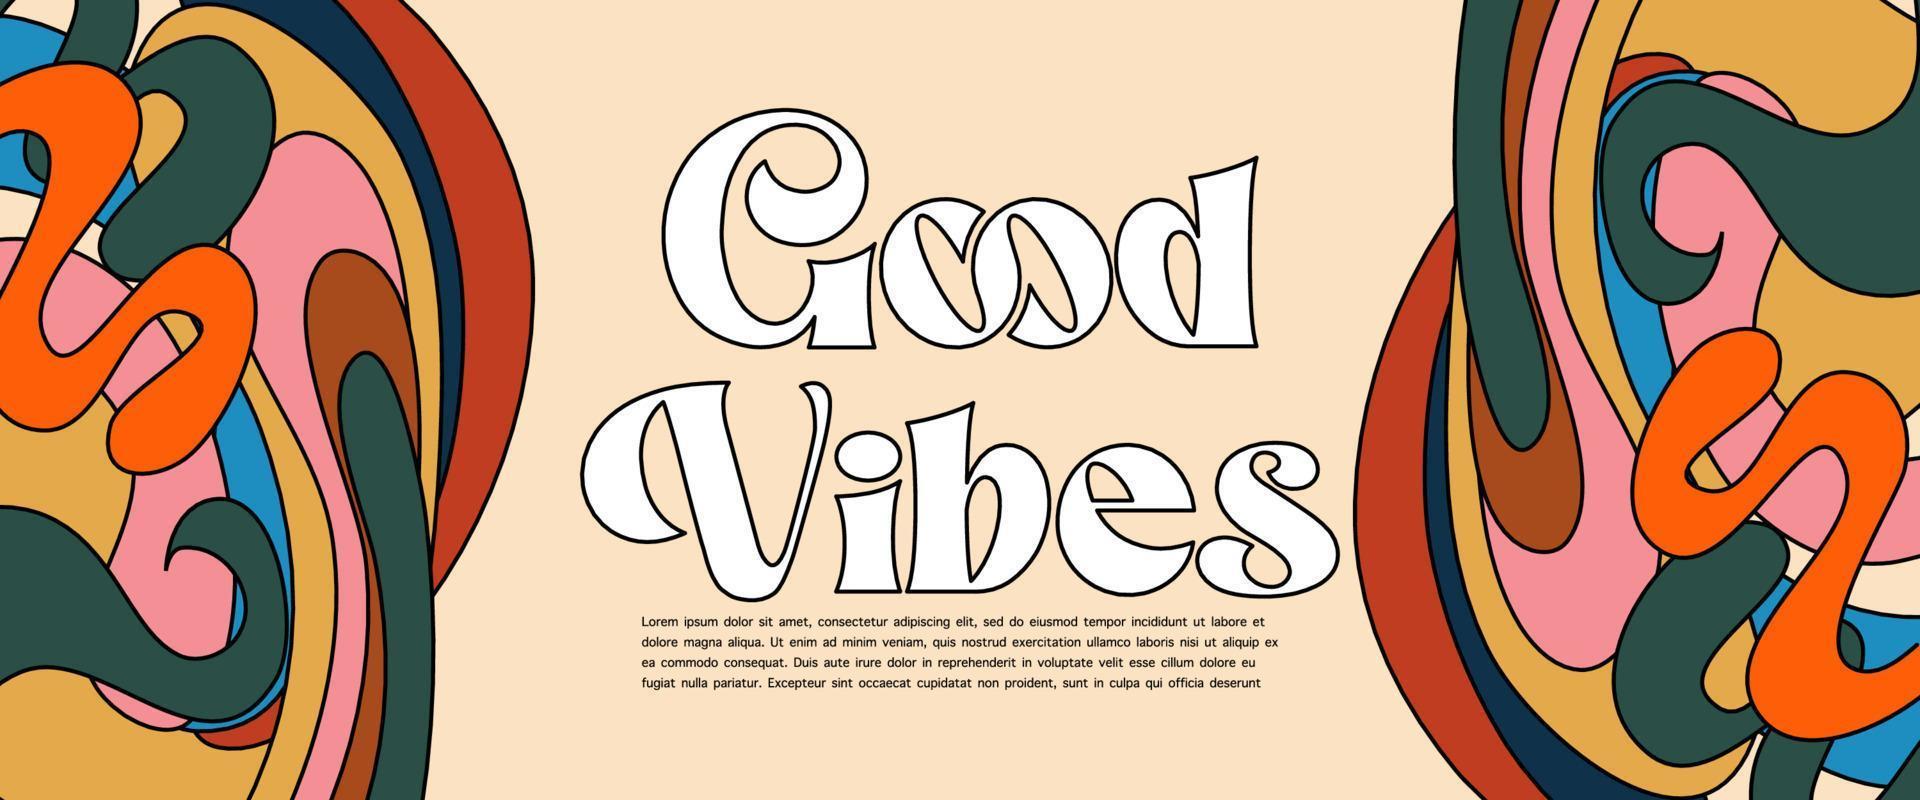 70s groovy retro good vibes only slogan with hippie swirl Pastel hand drawn psychedelic groovy background. vaporwave psychedelic style of the 80s - 90s. vector